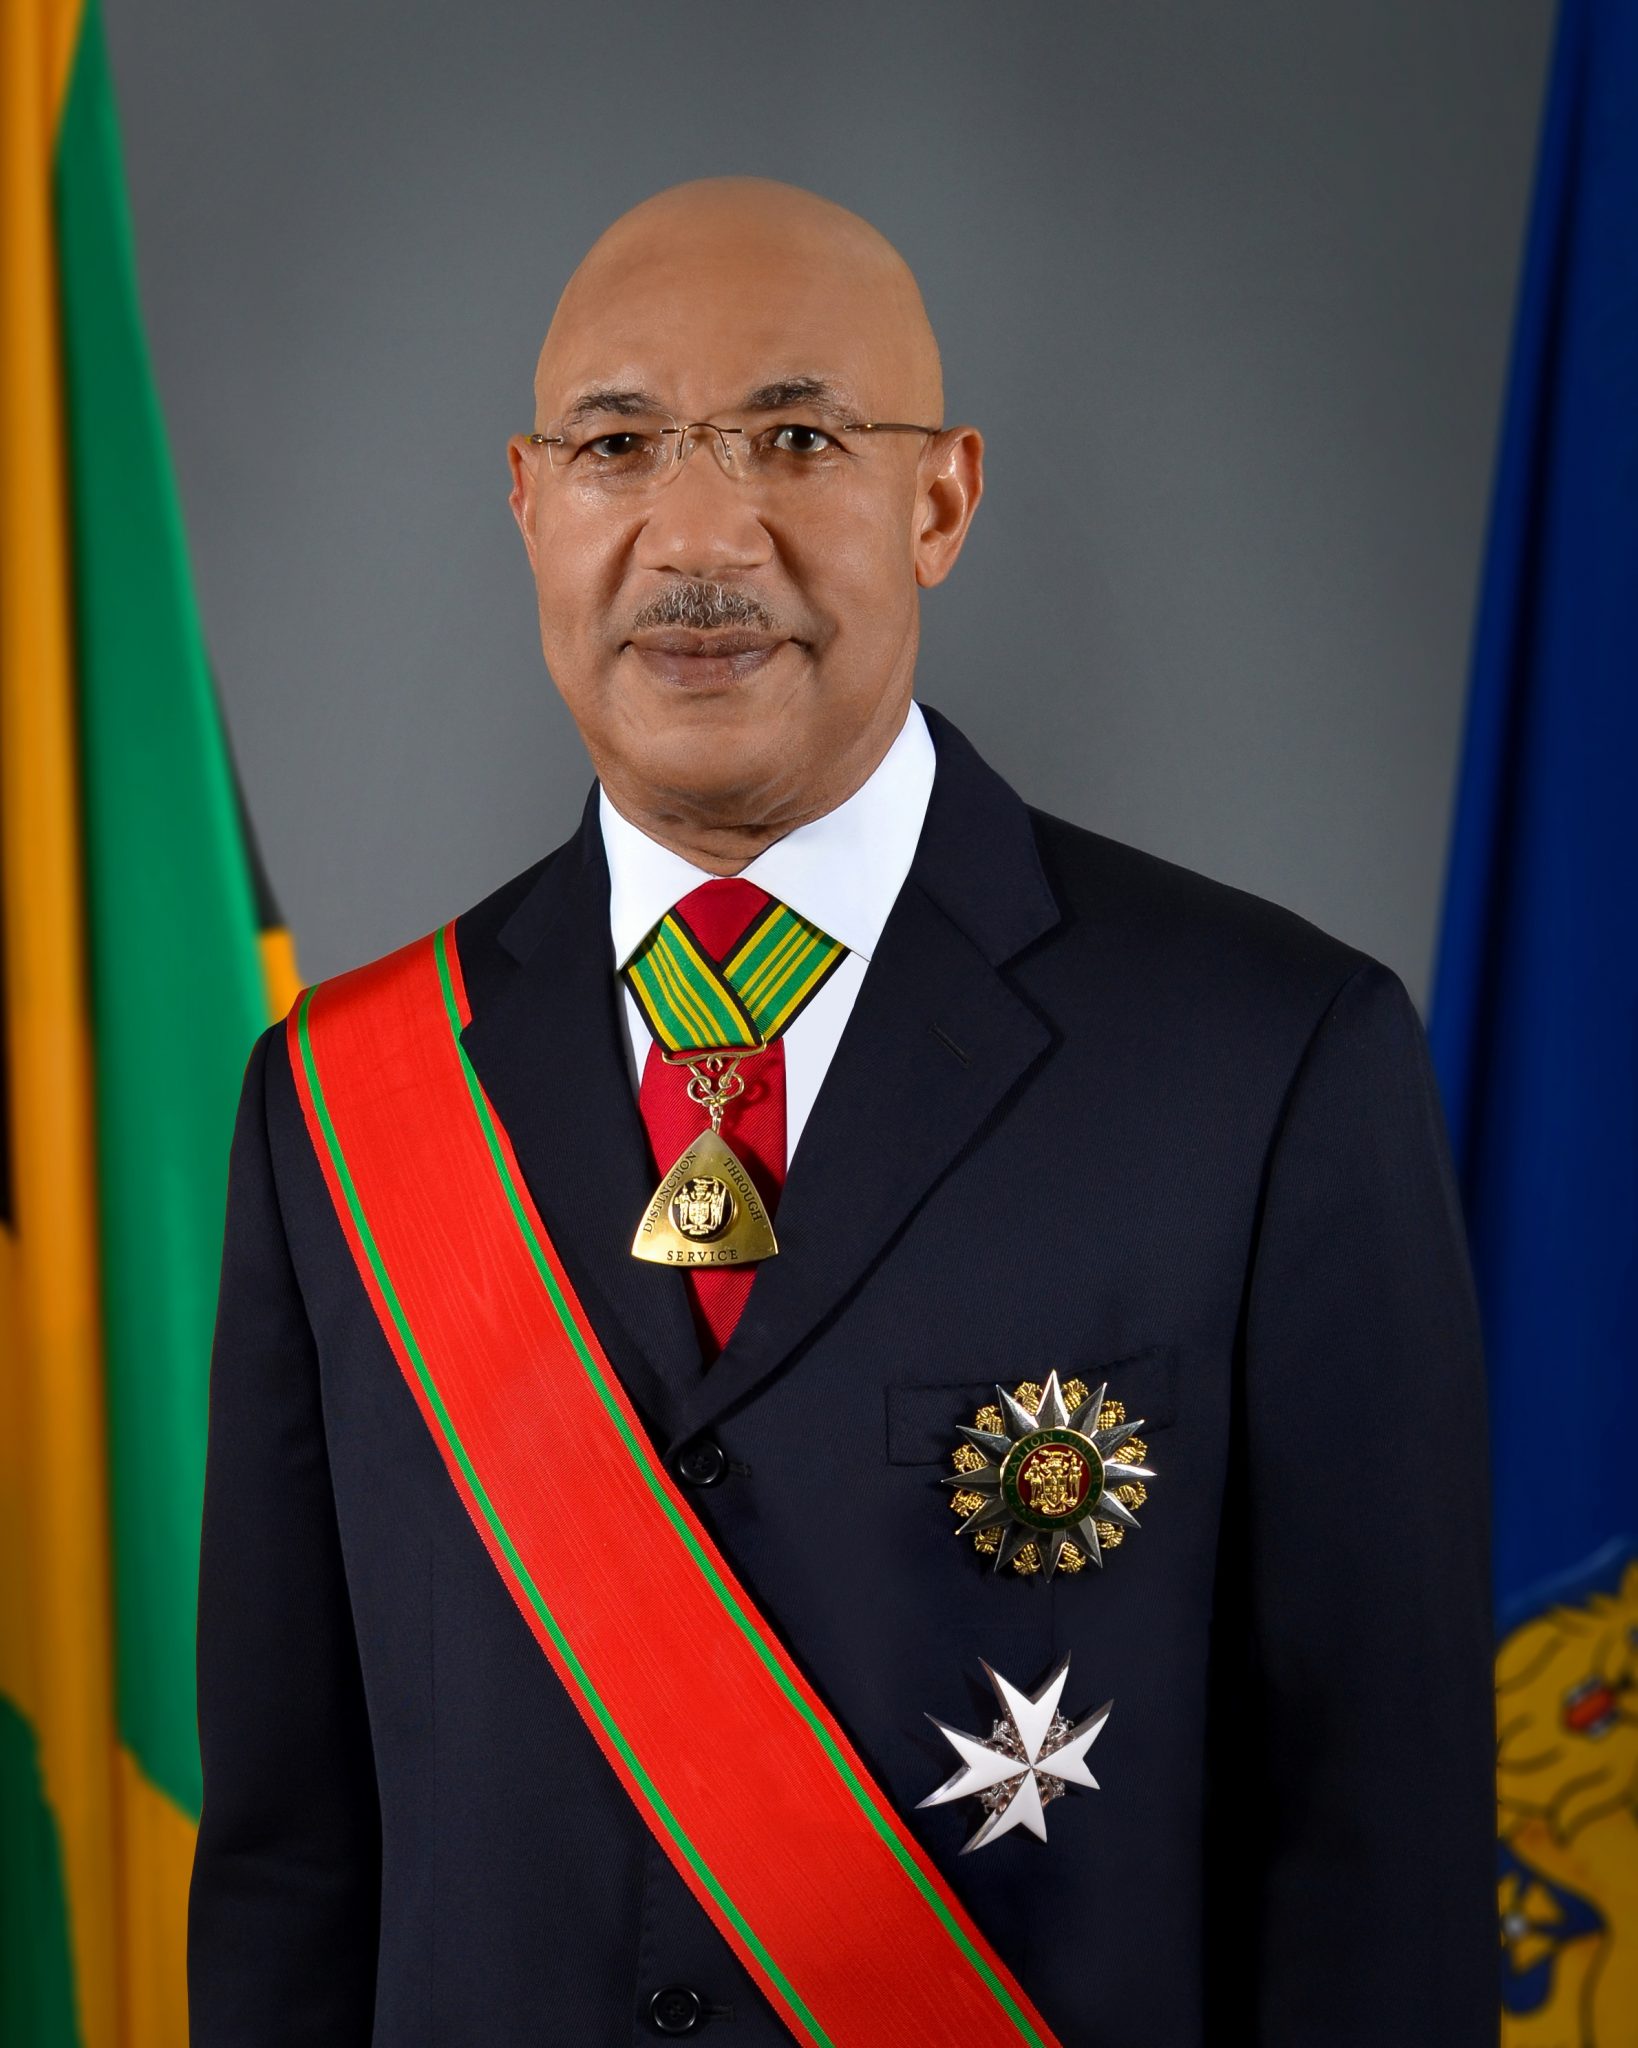 His Excellency, The Most Honourable Sir Patrick Allen, ON, GCMG, CD, KSt.J, Governor-General